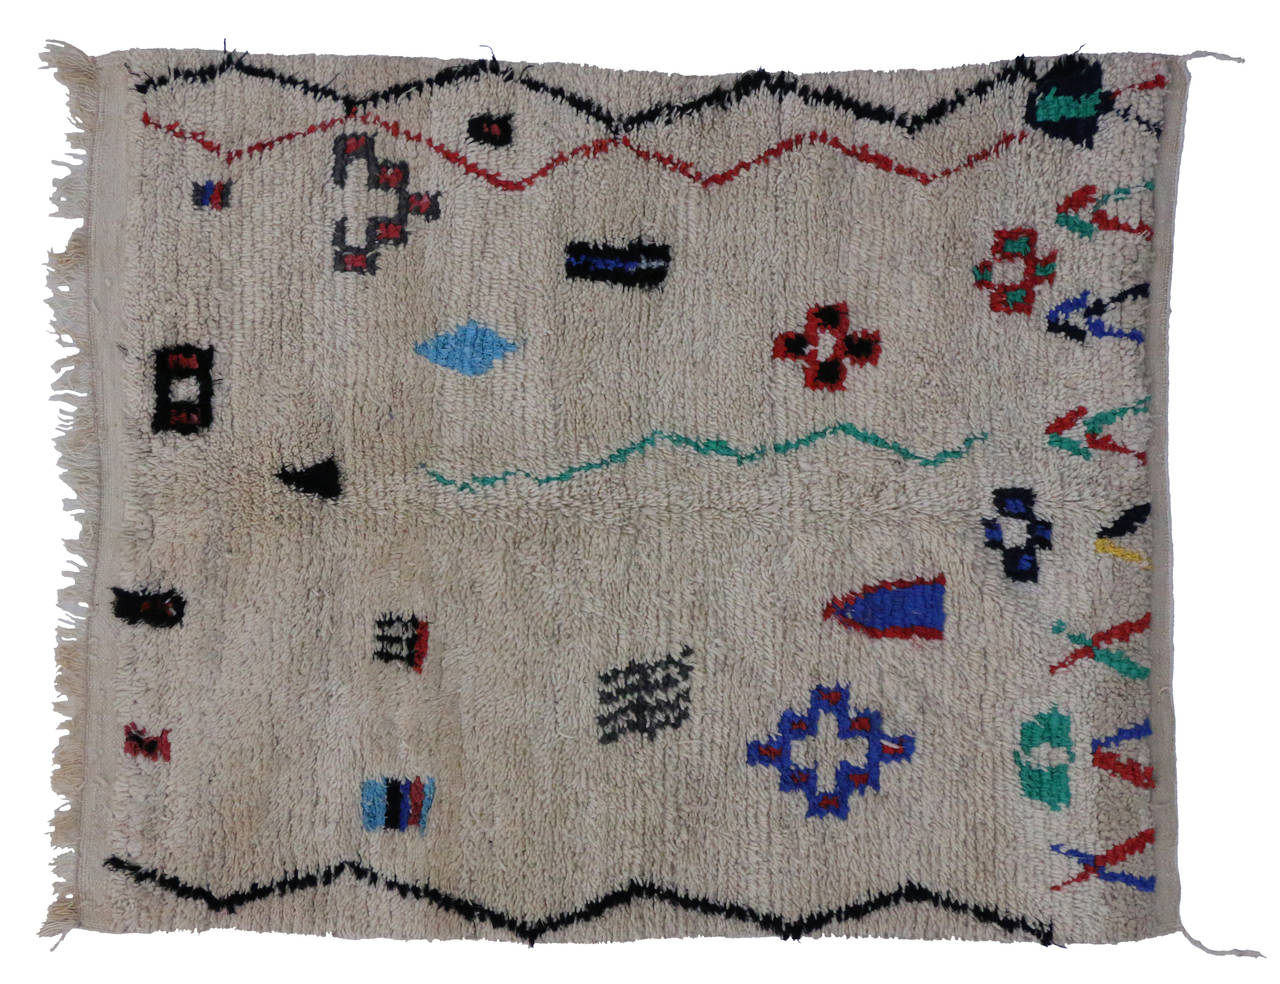 Moroccan rugs from the Azilal region are notable for their dynamic colorful designs and for their strong sense of geometric structure. While the patterns may seem whimsical and random – they are very significant to the rug weaver’s life. The Berber